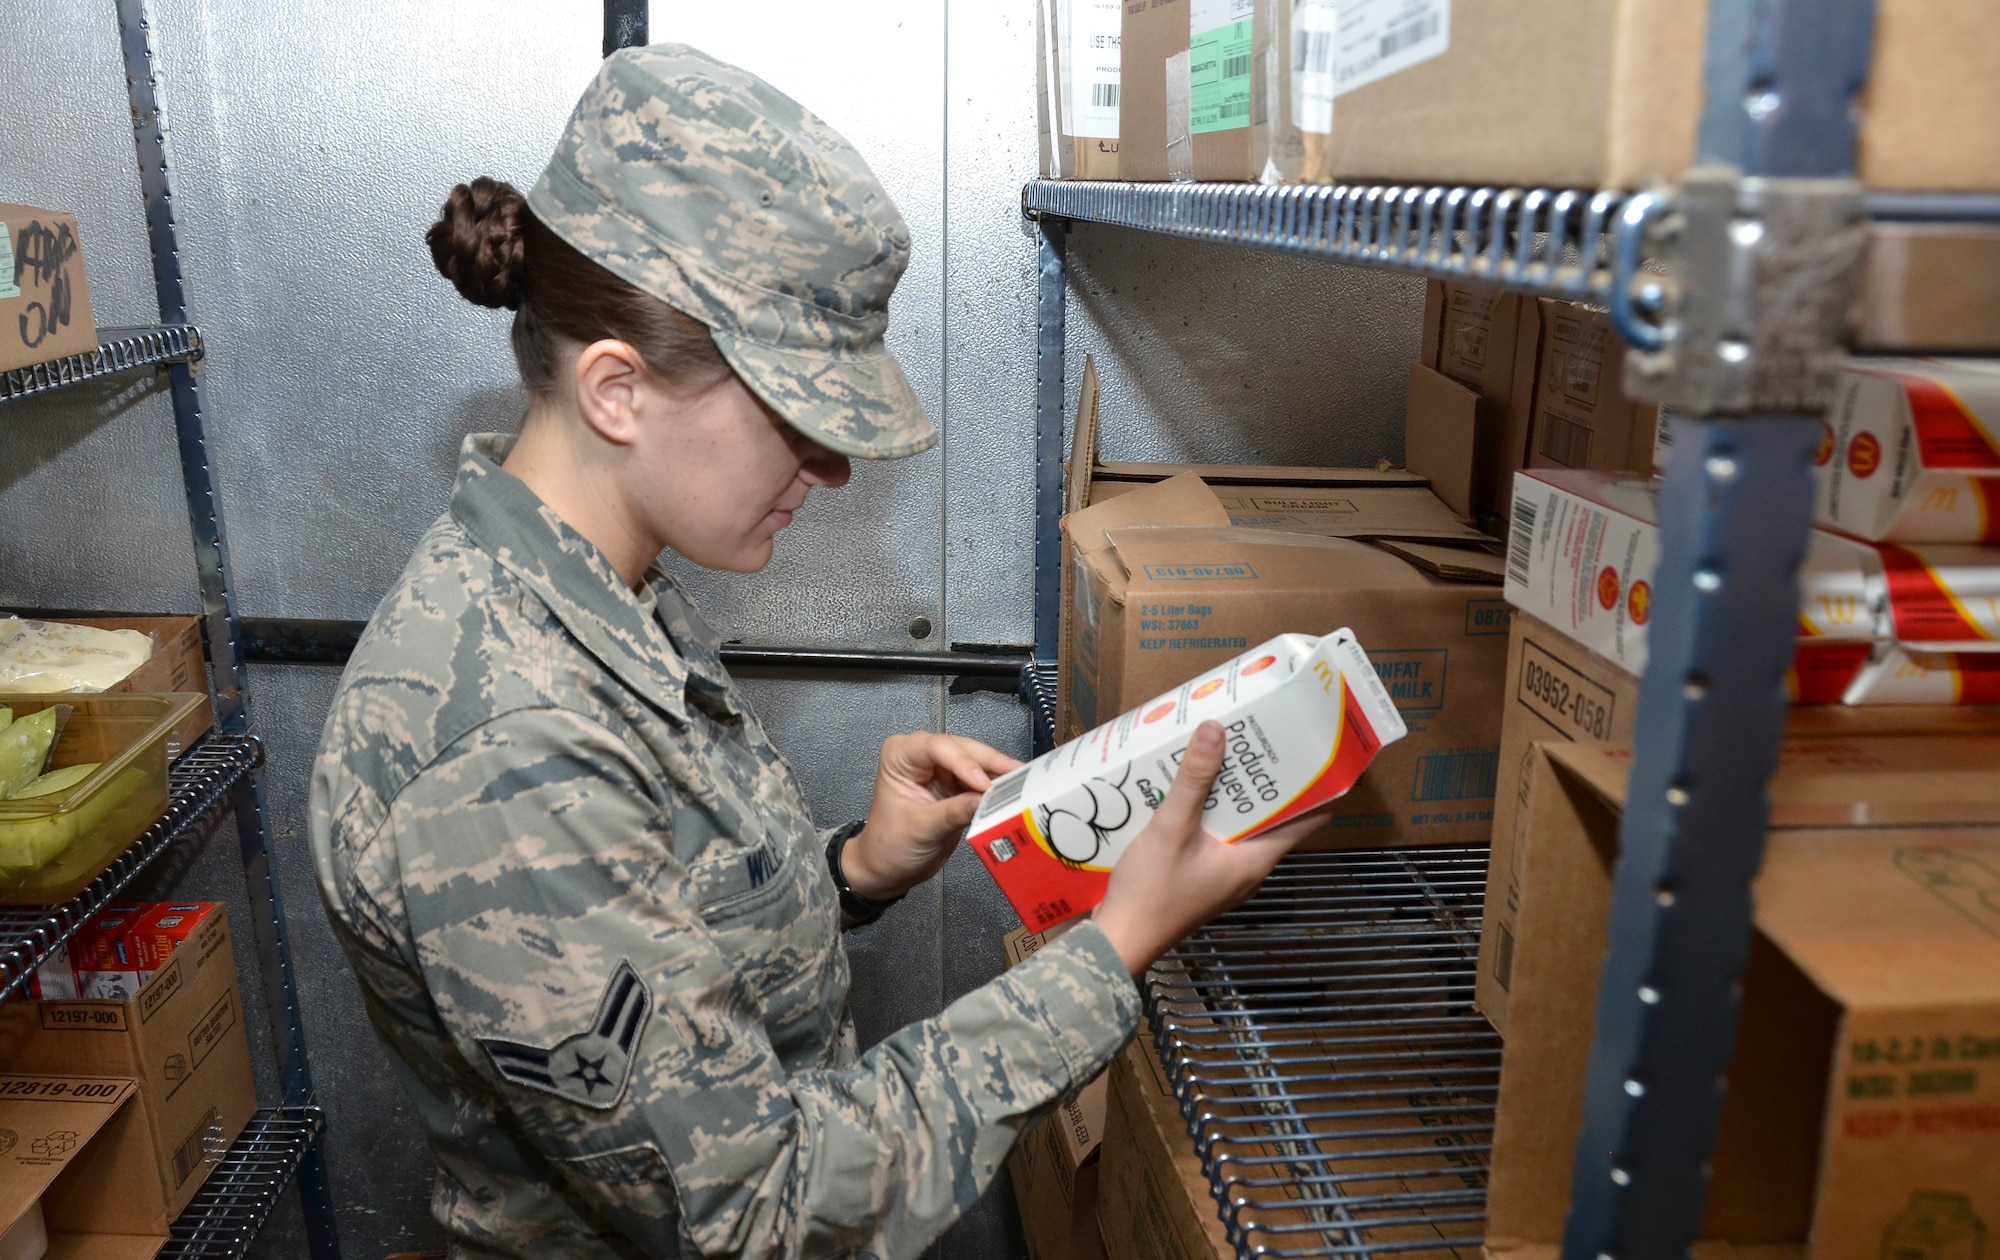 Airman 1st Class Taylor Wiley, preventative medicine, 117th Medical Group, verifies food served at Naval Medical Center San Diego is safe for consumption in San Diego, Calif., June 28, 2016.  The 117 MDG trained with the U.S. Navy at Naval Medical Center San Diego.  The training included Airmen being implemented in real world U.S. Naval operations.  (U.S. Air National Guard photo by Staff Sgt. Jeremy Farson/Released)   